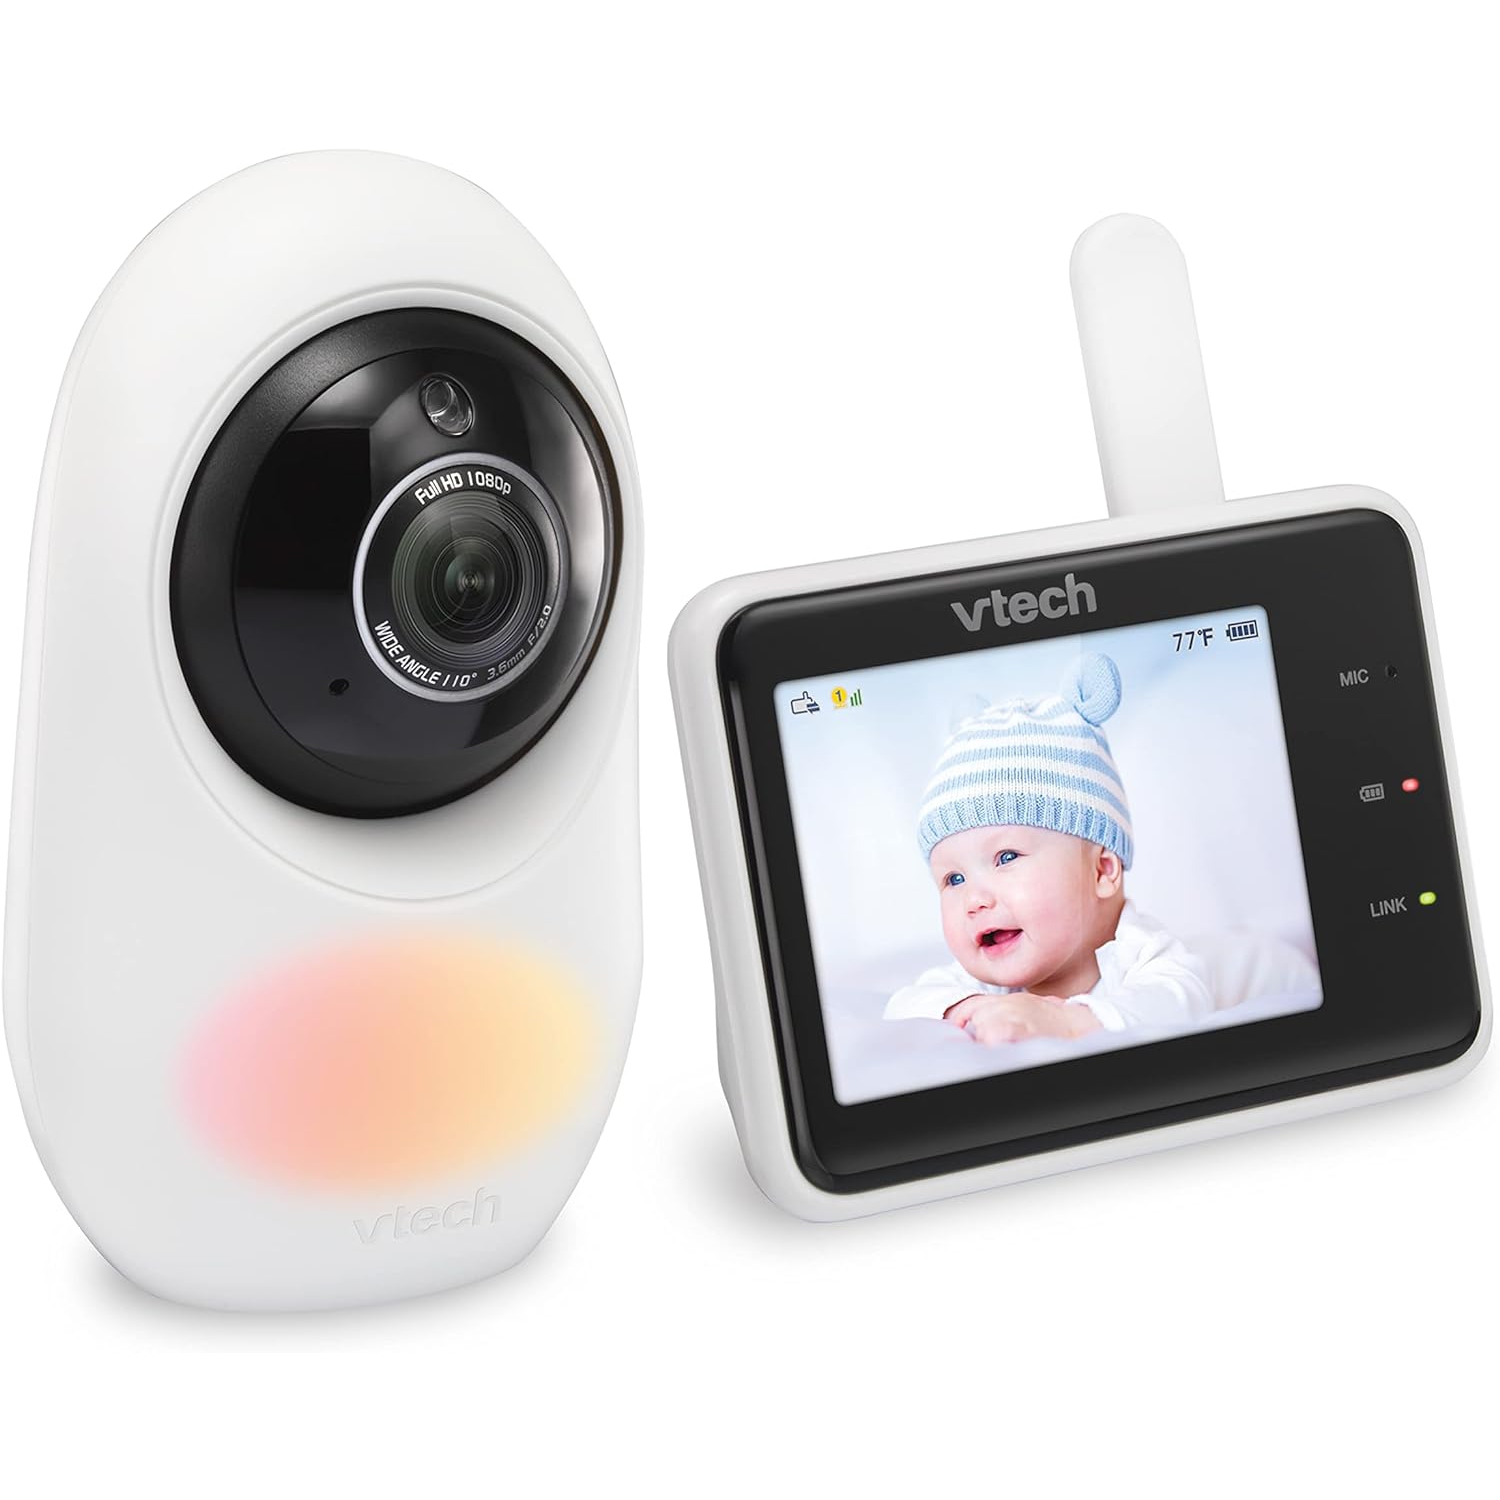 Refurbished (Good) - VTech 1080p Smart WiFi Remote Access Video Baby Monitor with Super-slim 2.8” Display - RM2751